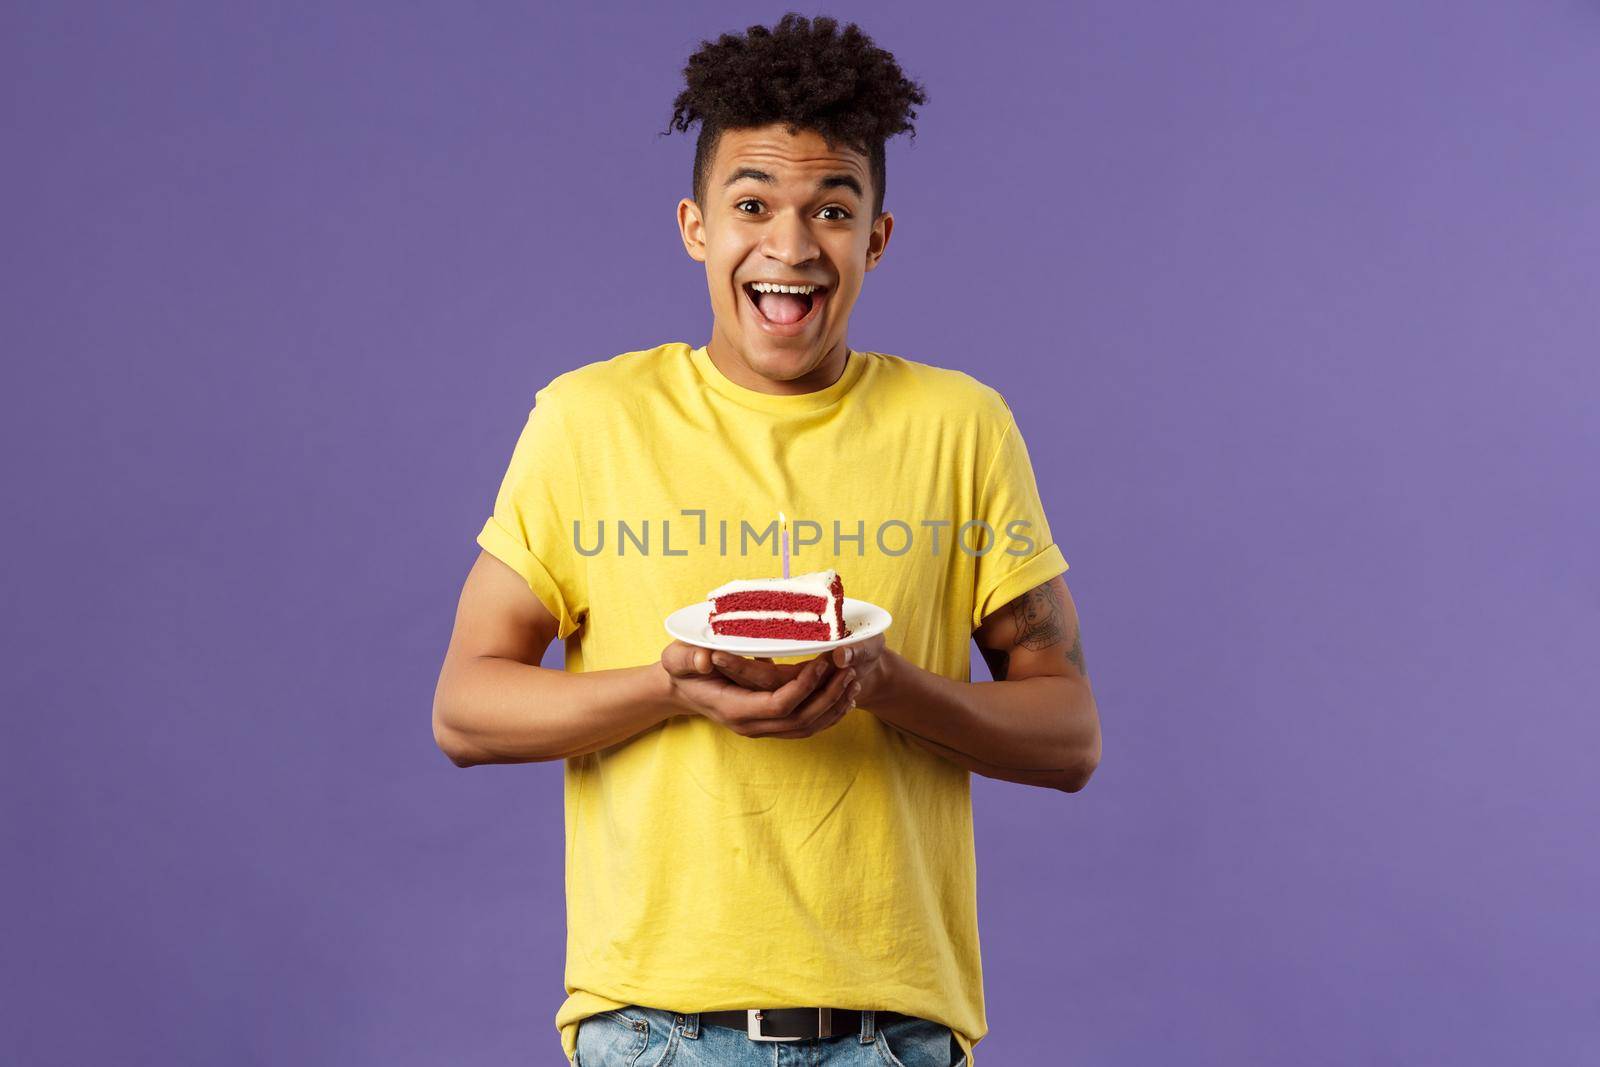 Happy birthday to me. Portrait of upbeat, excited hispanic man with dreads celebrating b-day, holding plate cake with lit candle, smiling amused, making wish, purple background by Benzoix